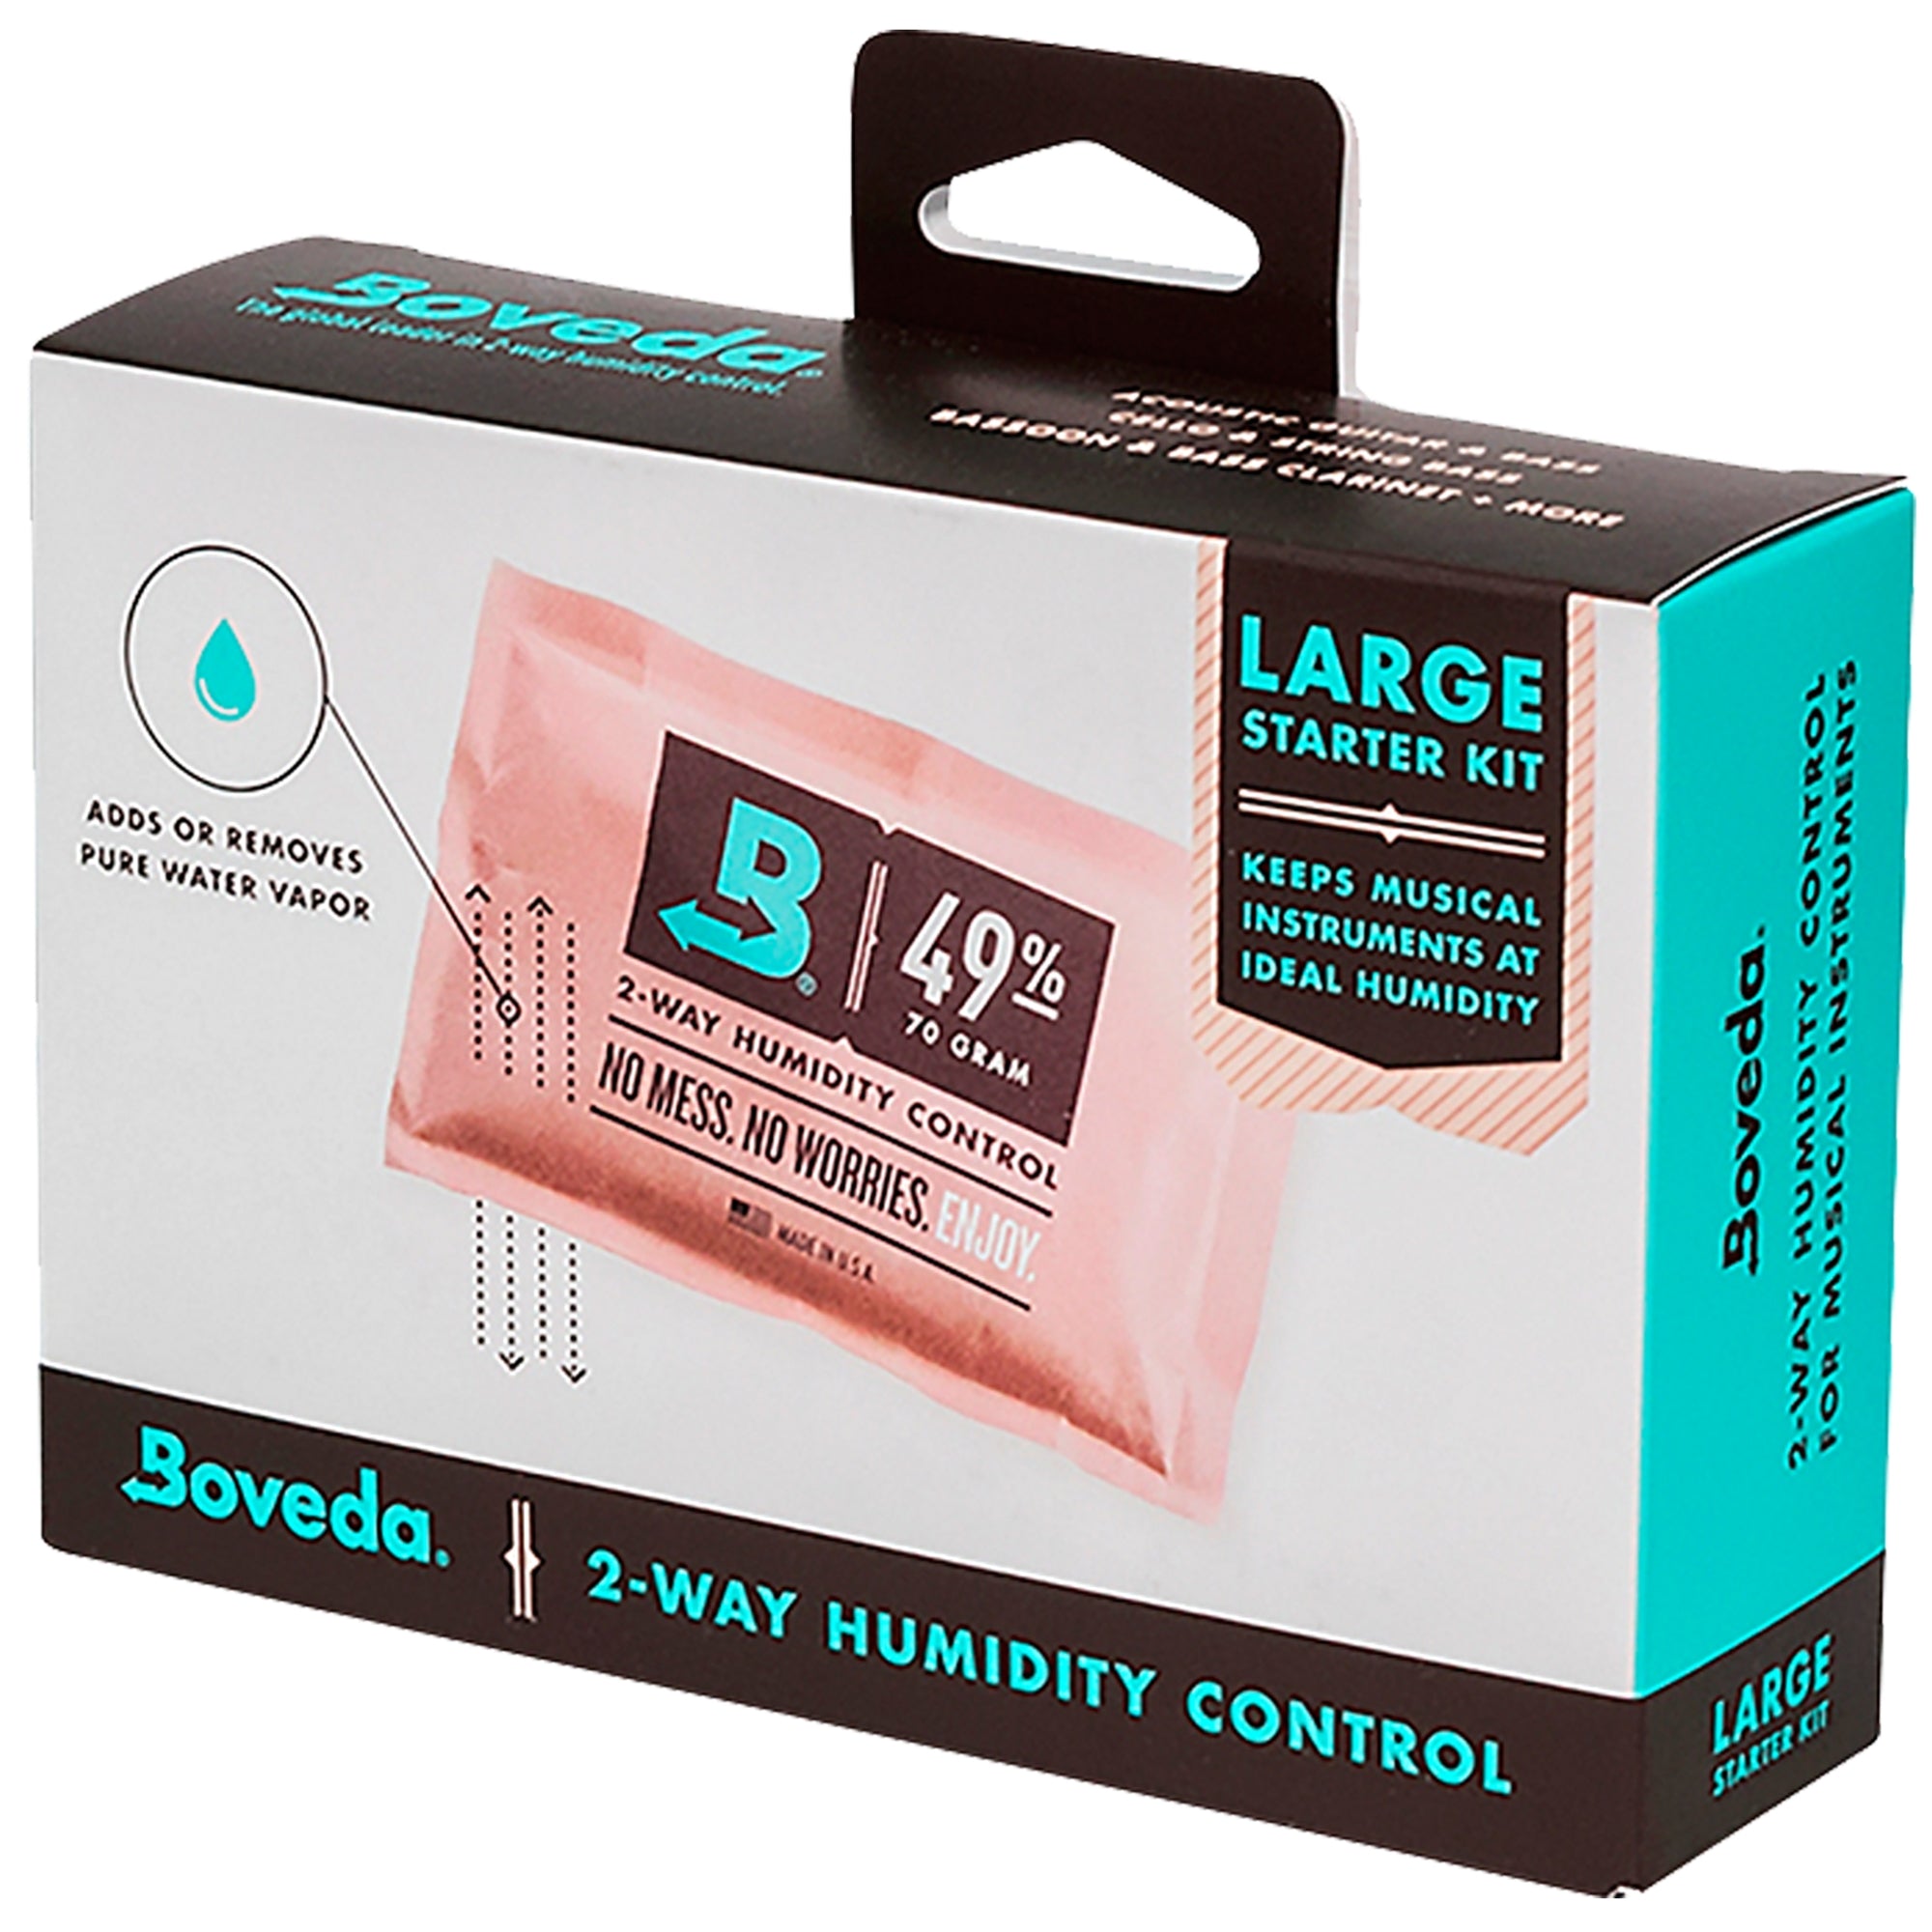 Boveda BVMFKLG Large 2-Way Humidity Control Starter Kit